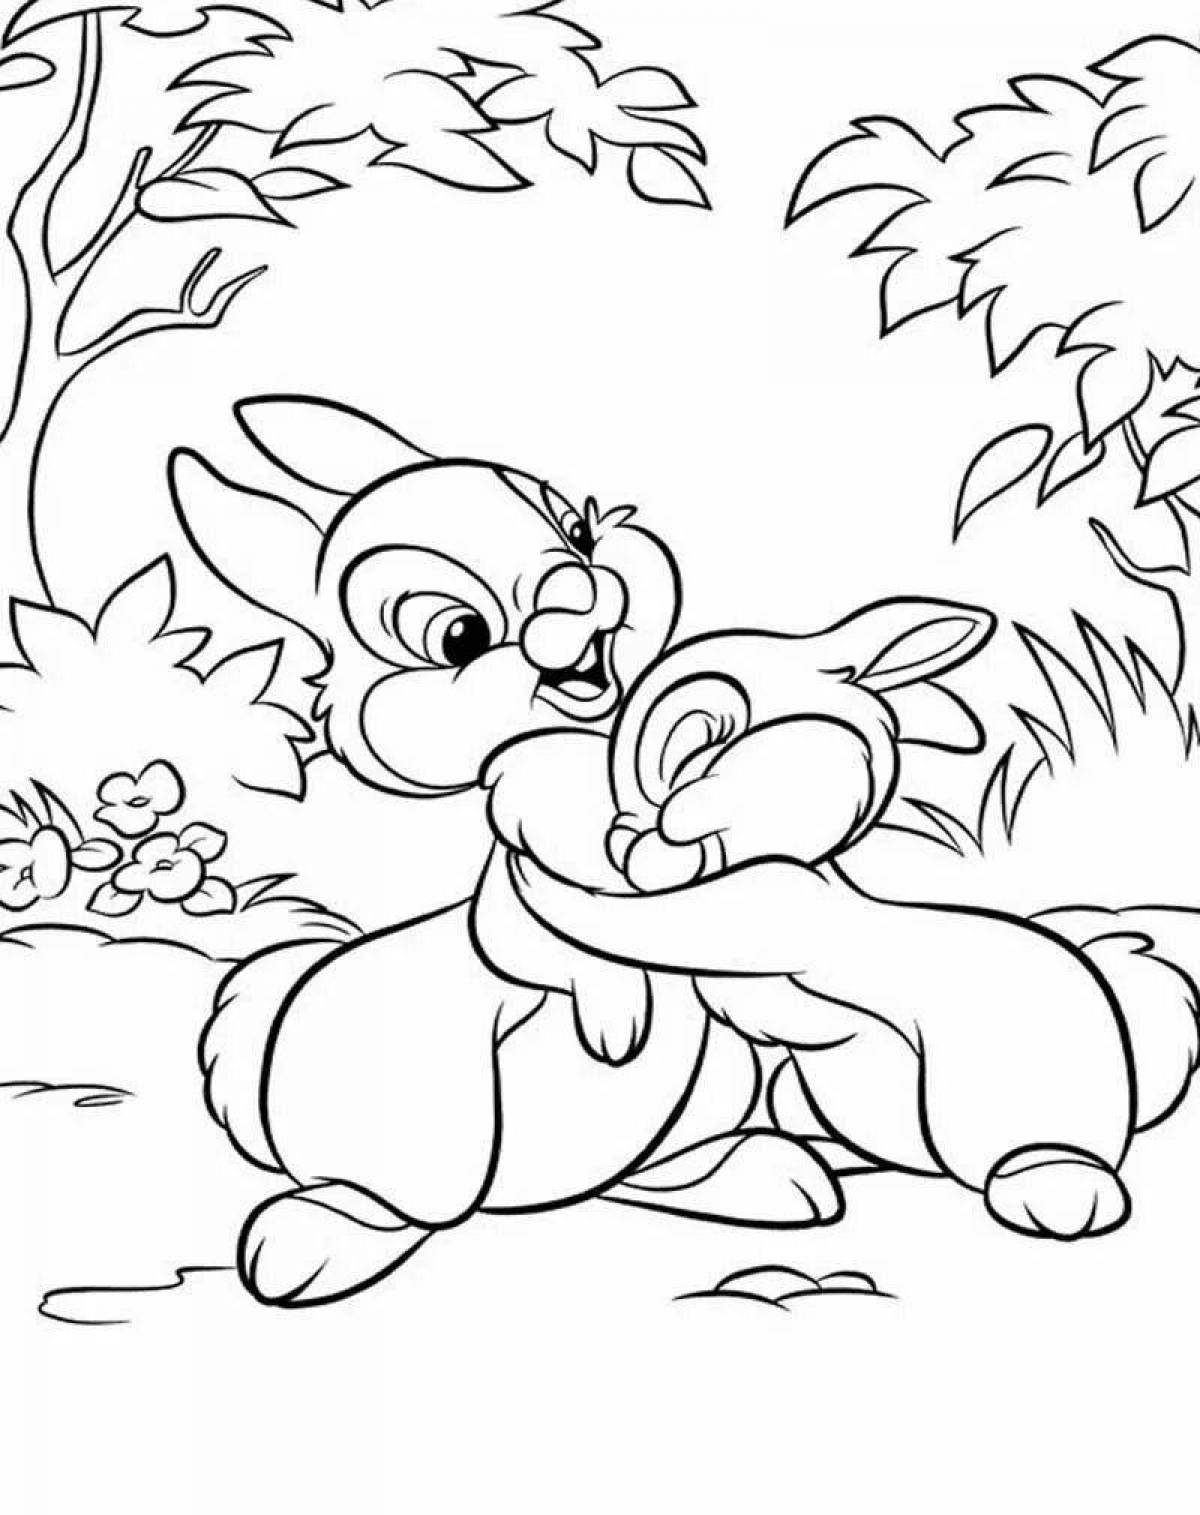 Snuggable coloring page bunny